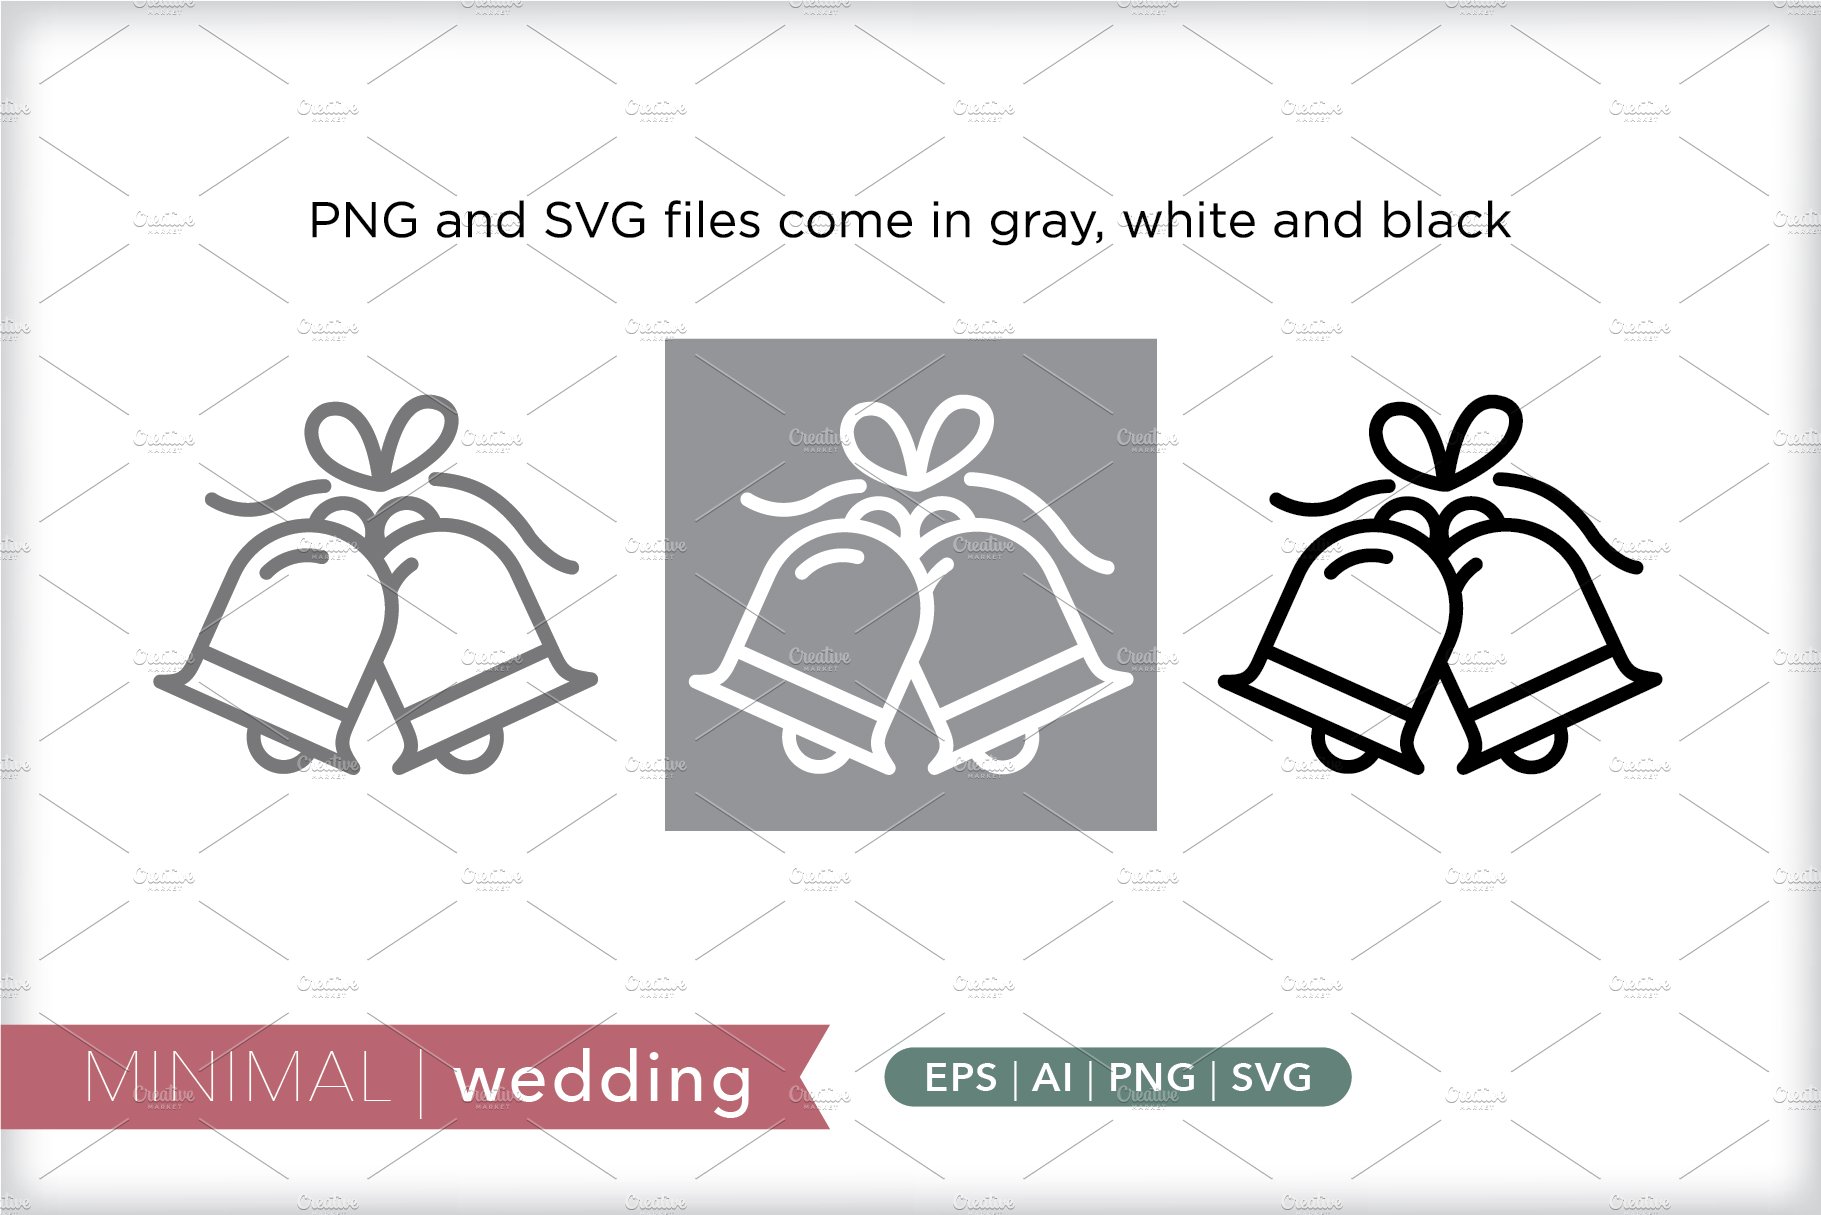 Minimal wedding icons preview image.